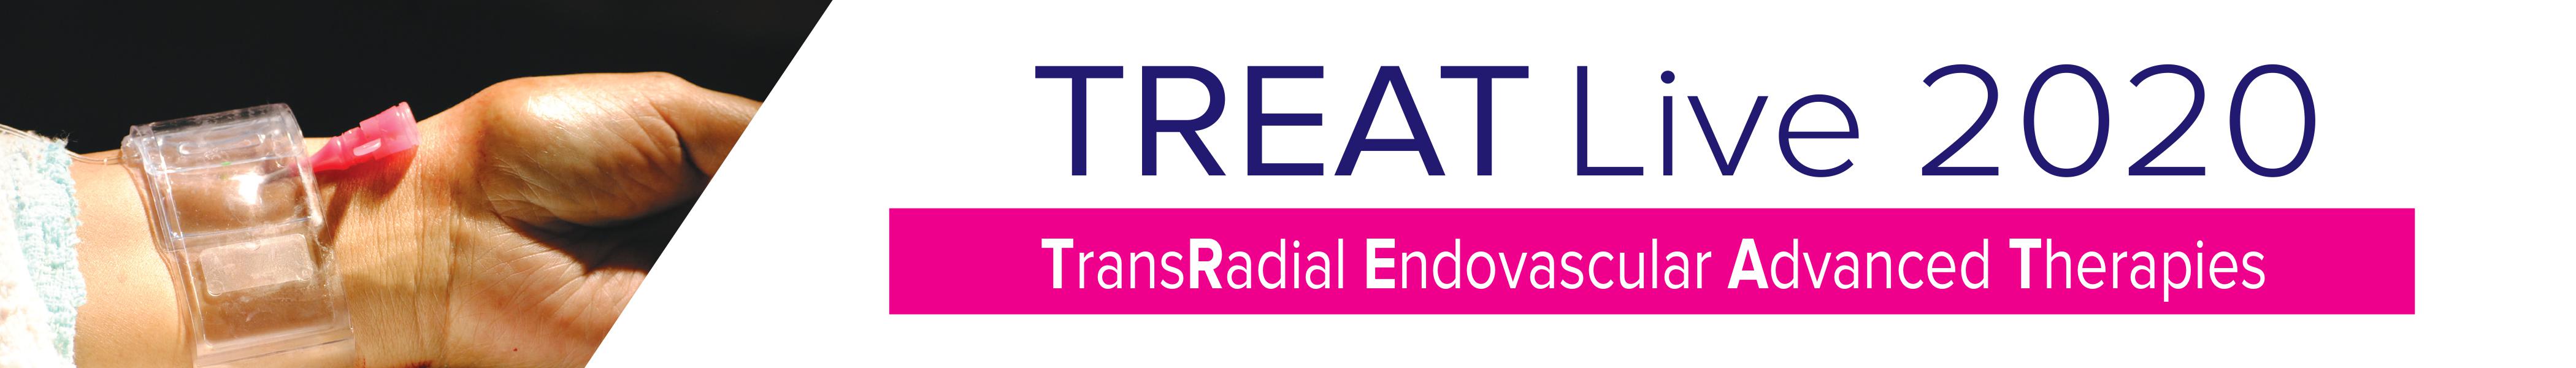 6th Annual TransRadial Endovascular Advanced Therapies Banner